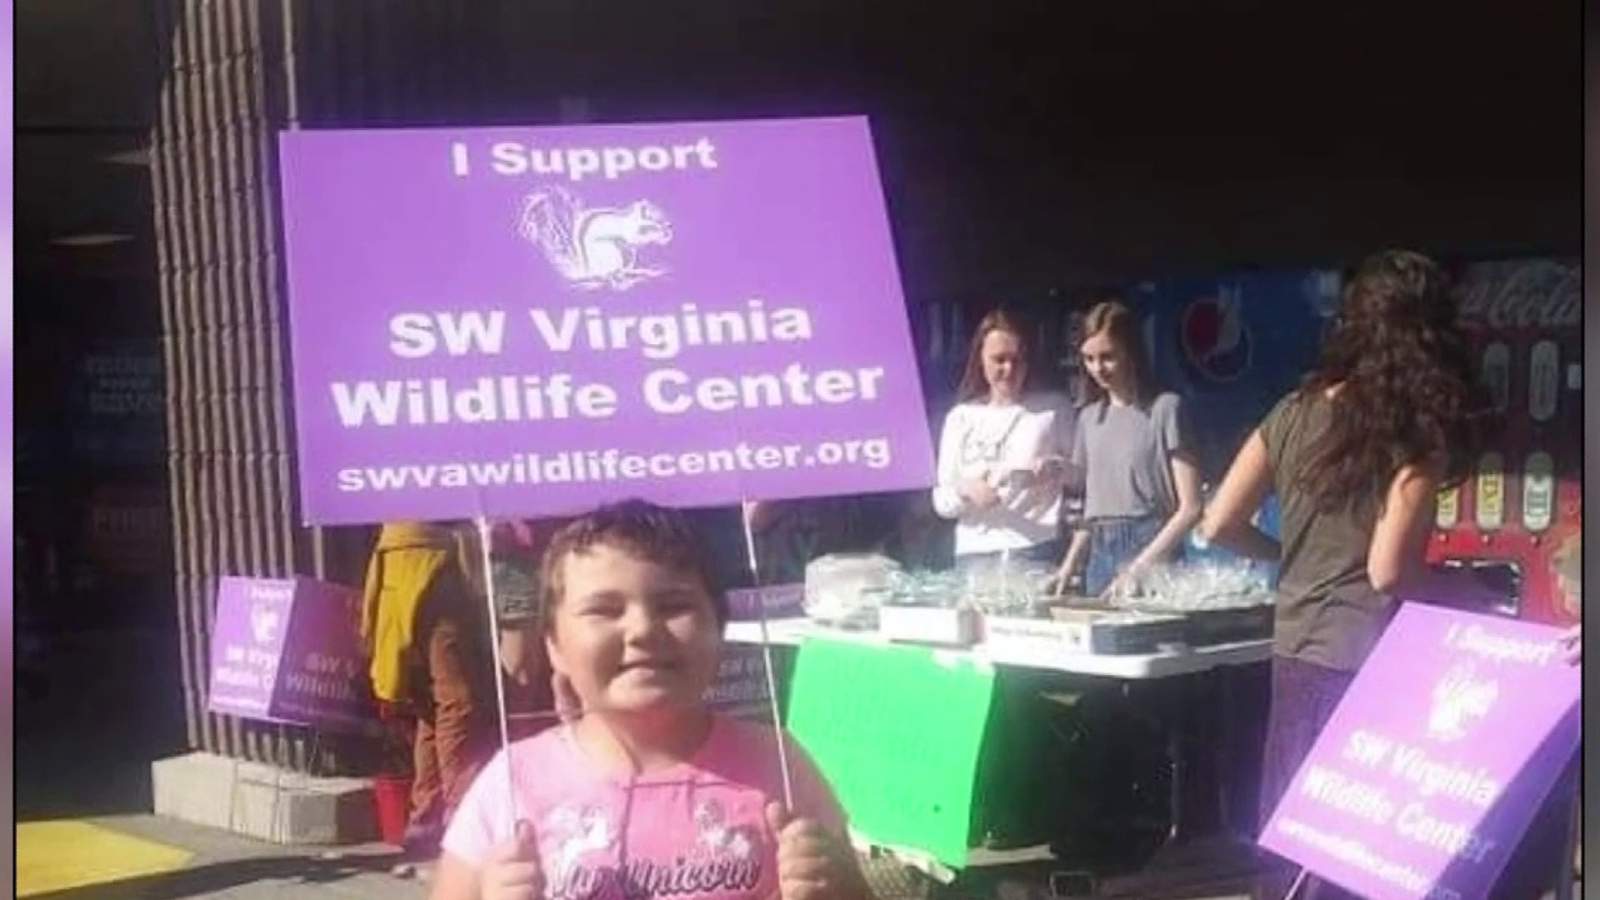 Instead of gifts, Salem boy asks for donations to local wildlife center for his birthday